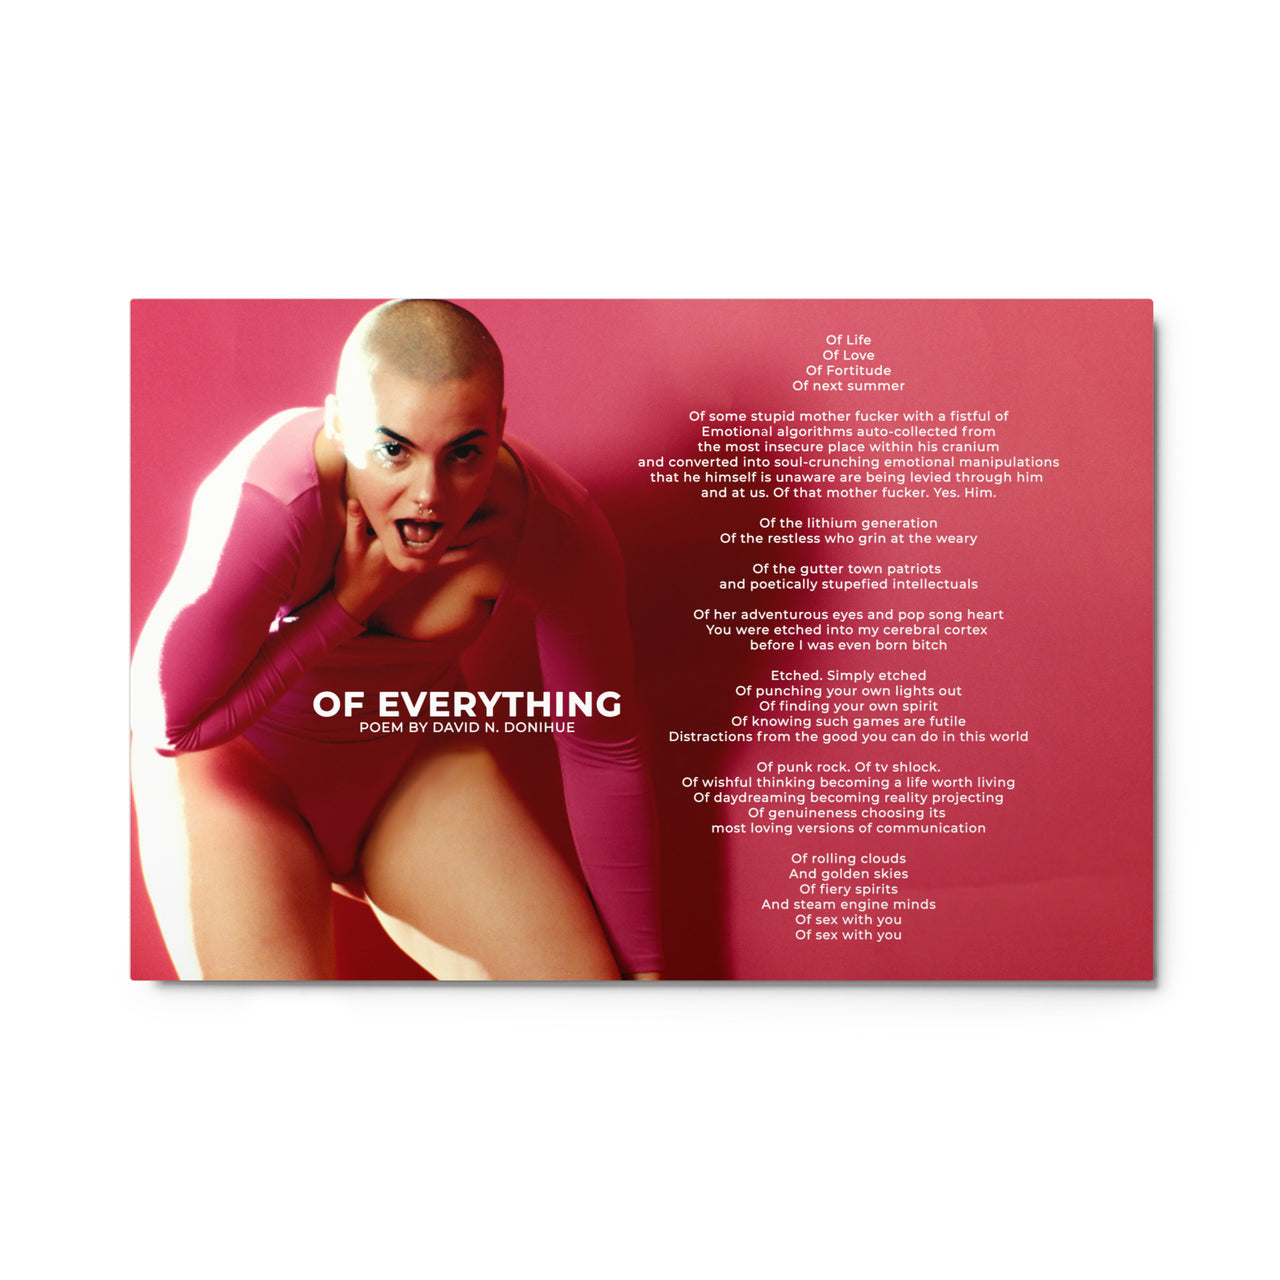 Ltd Edition Poem on an Extra Large 24x36 High Gloss Metal prints "OF Everything" By David N. Donihue (1/1000)